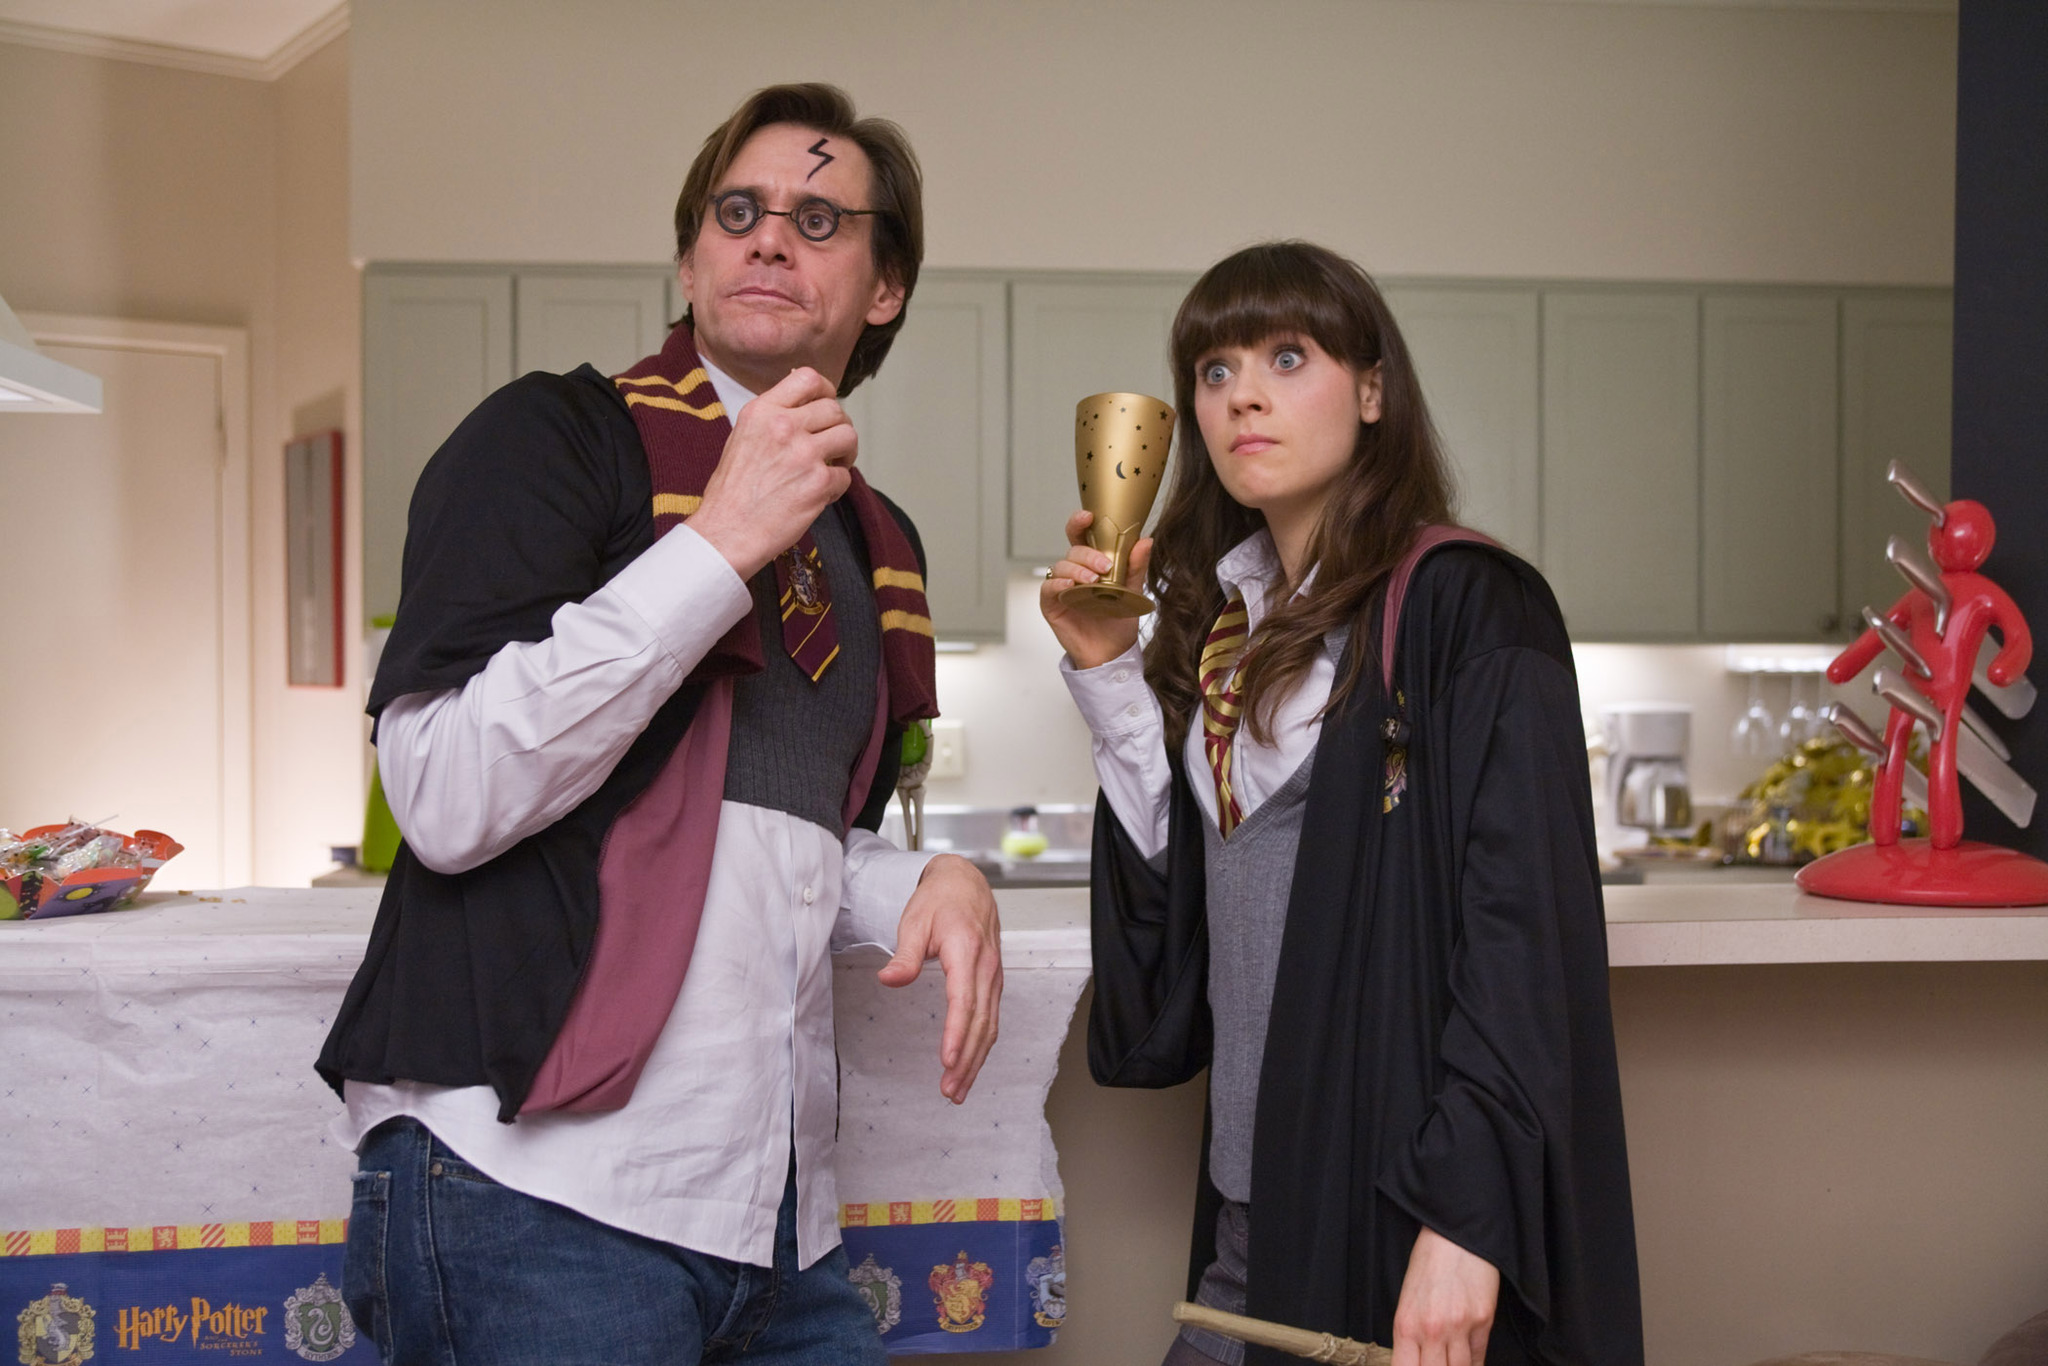 Still of Jim Carrey and Zooey Deschanel in Yes Man (2008)